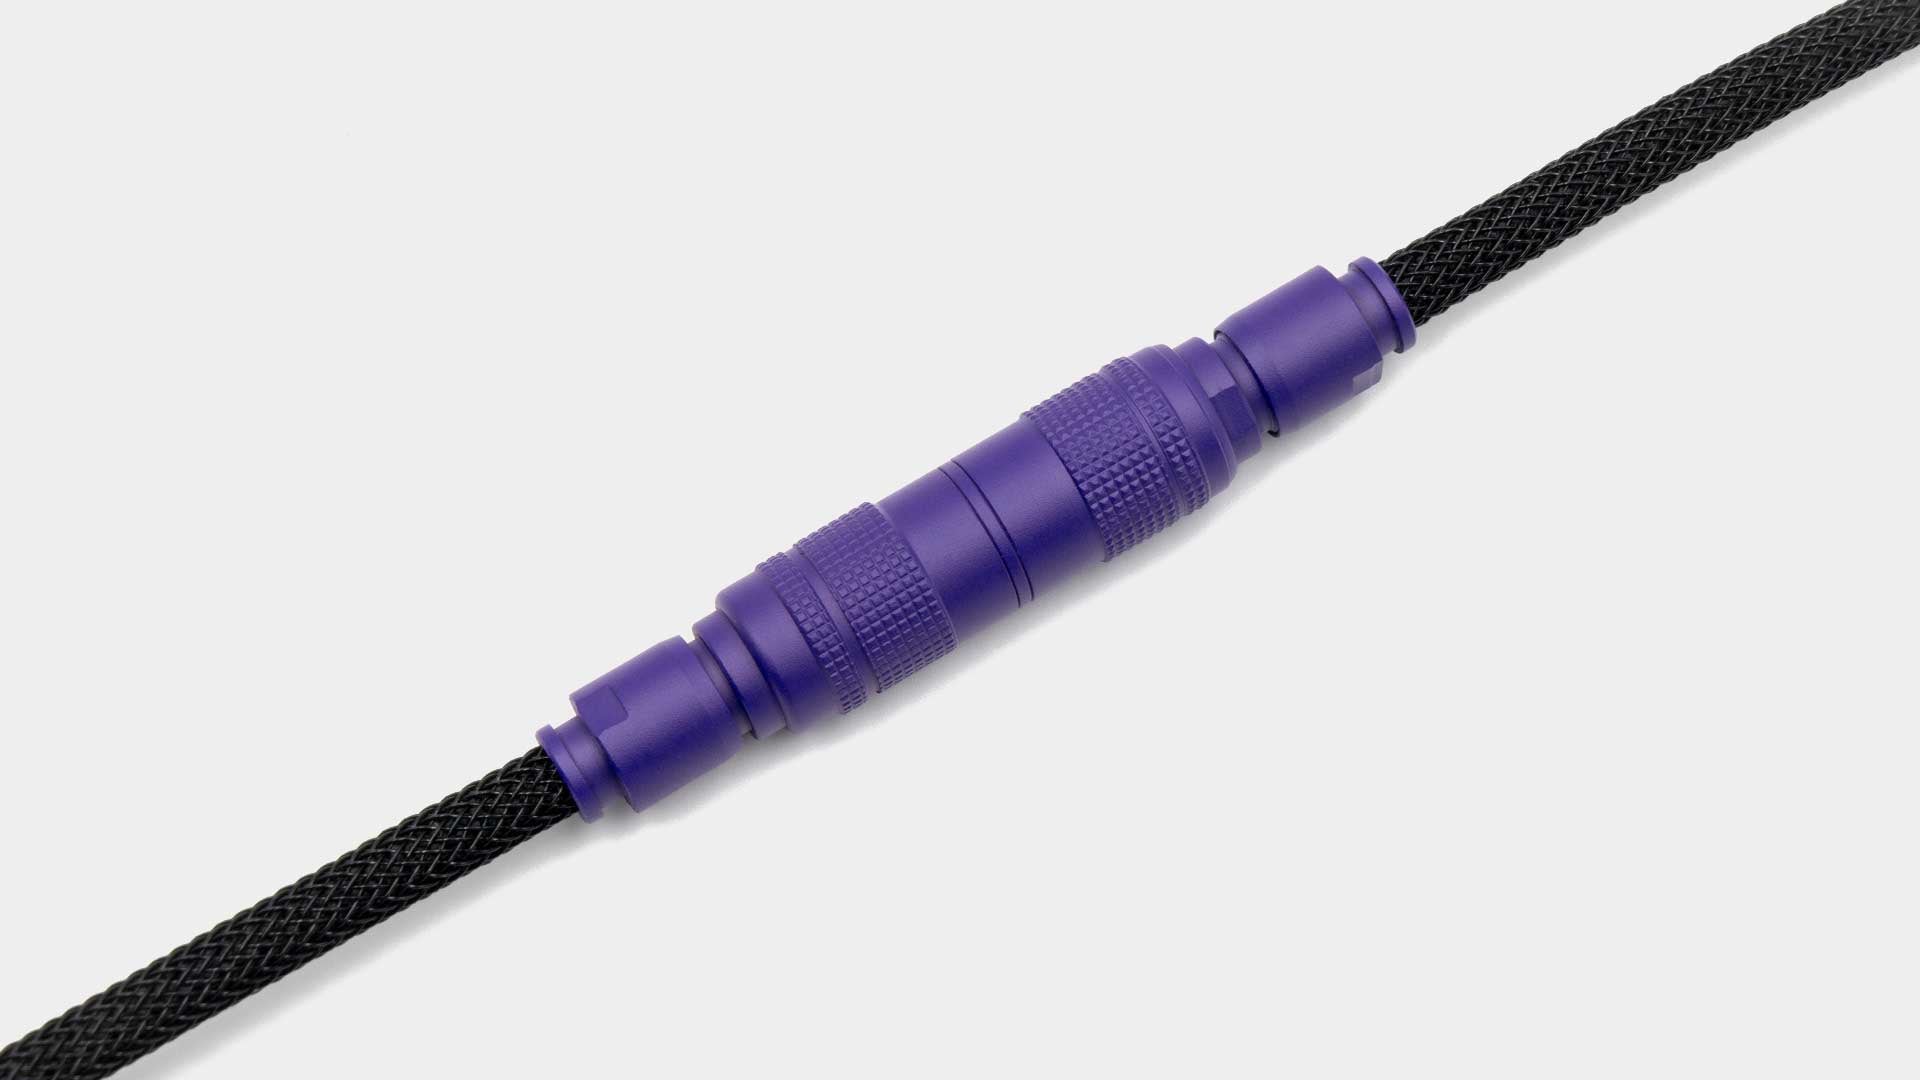 PURPLE NIGHT YC8 CABLE-Space Cables-coiled keyboard cable-coiled usb c cable-coiled cable keyboard